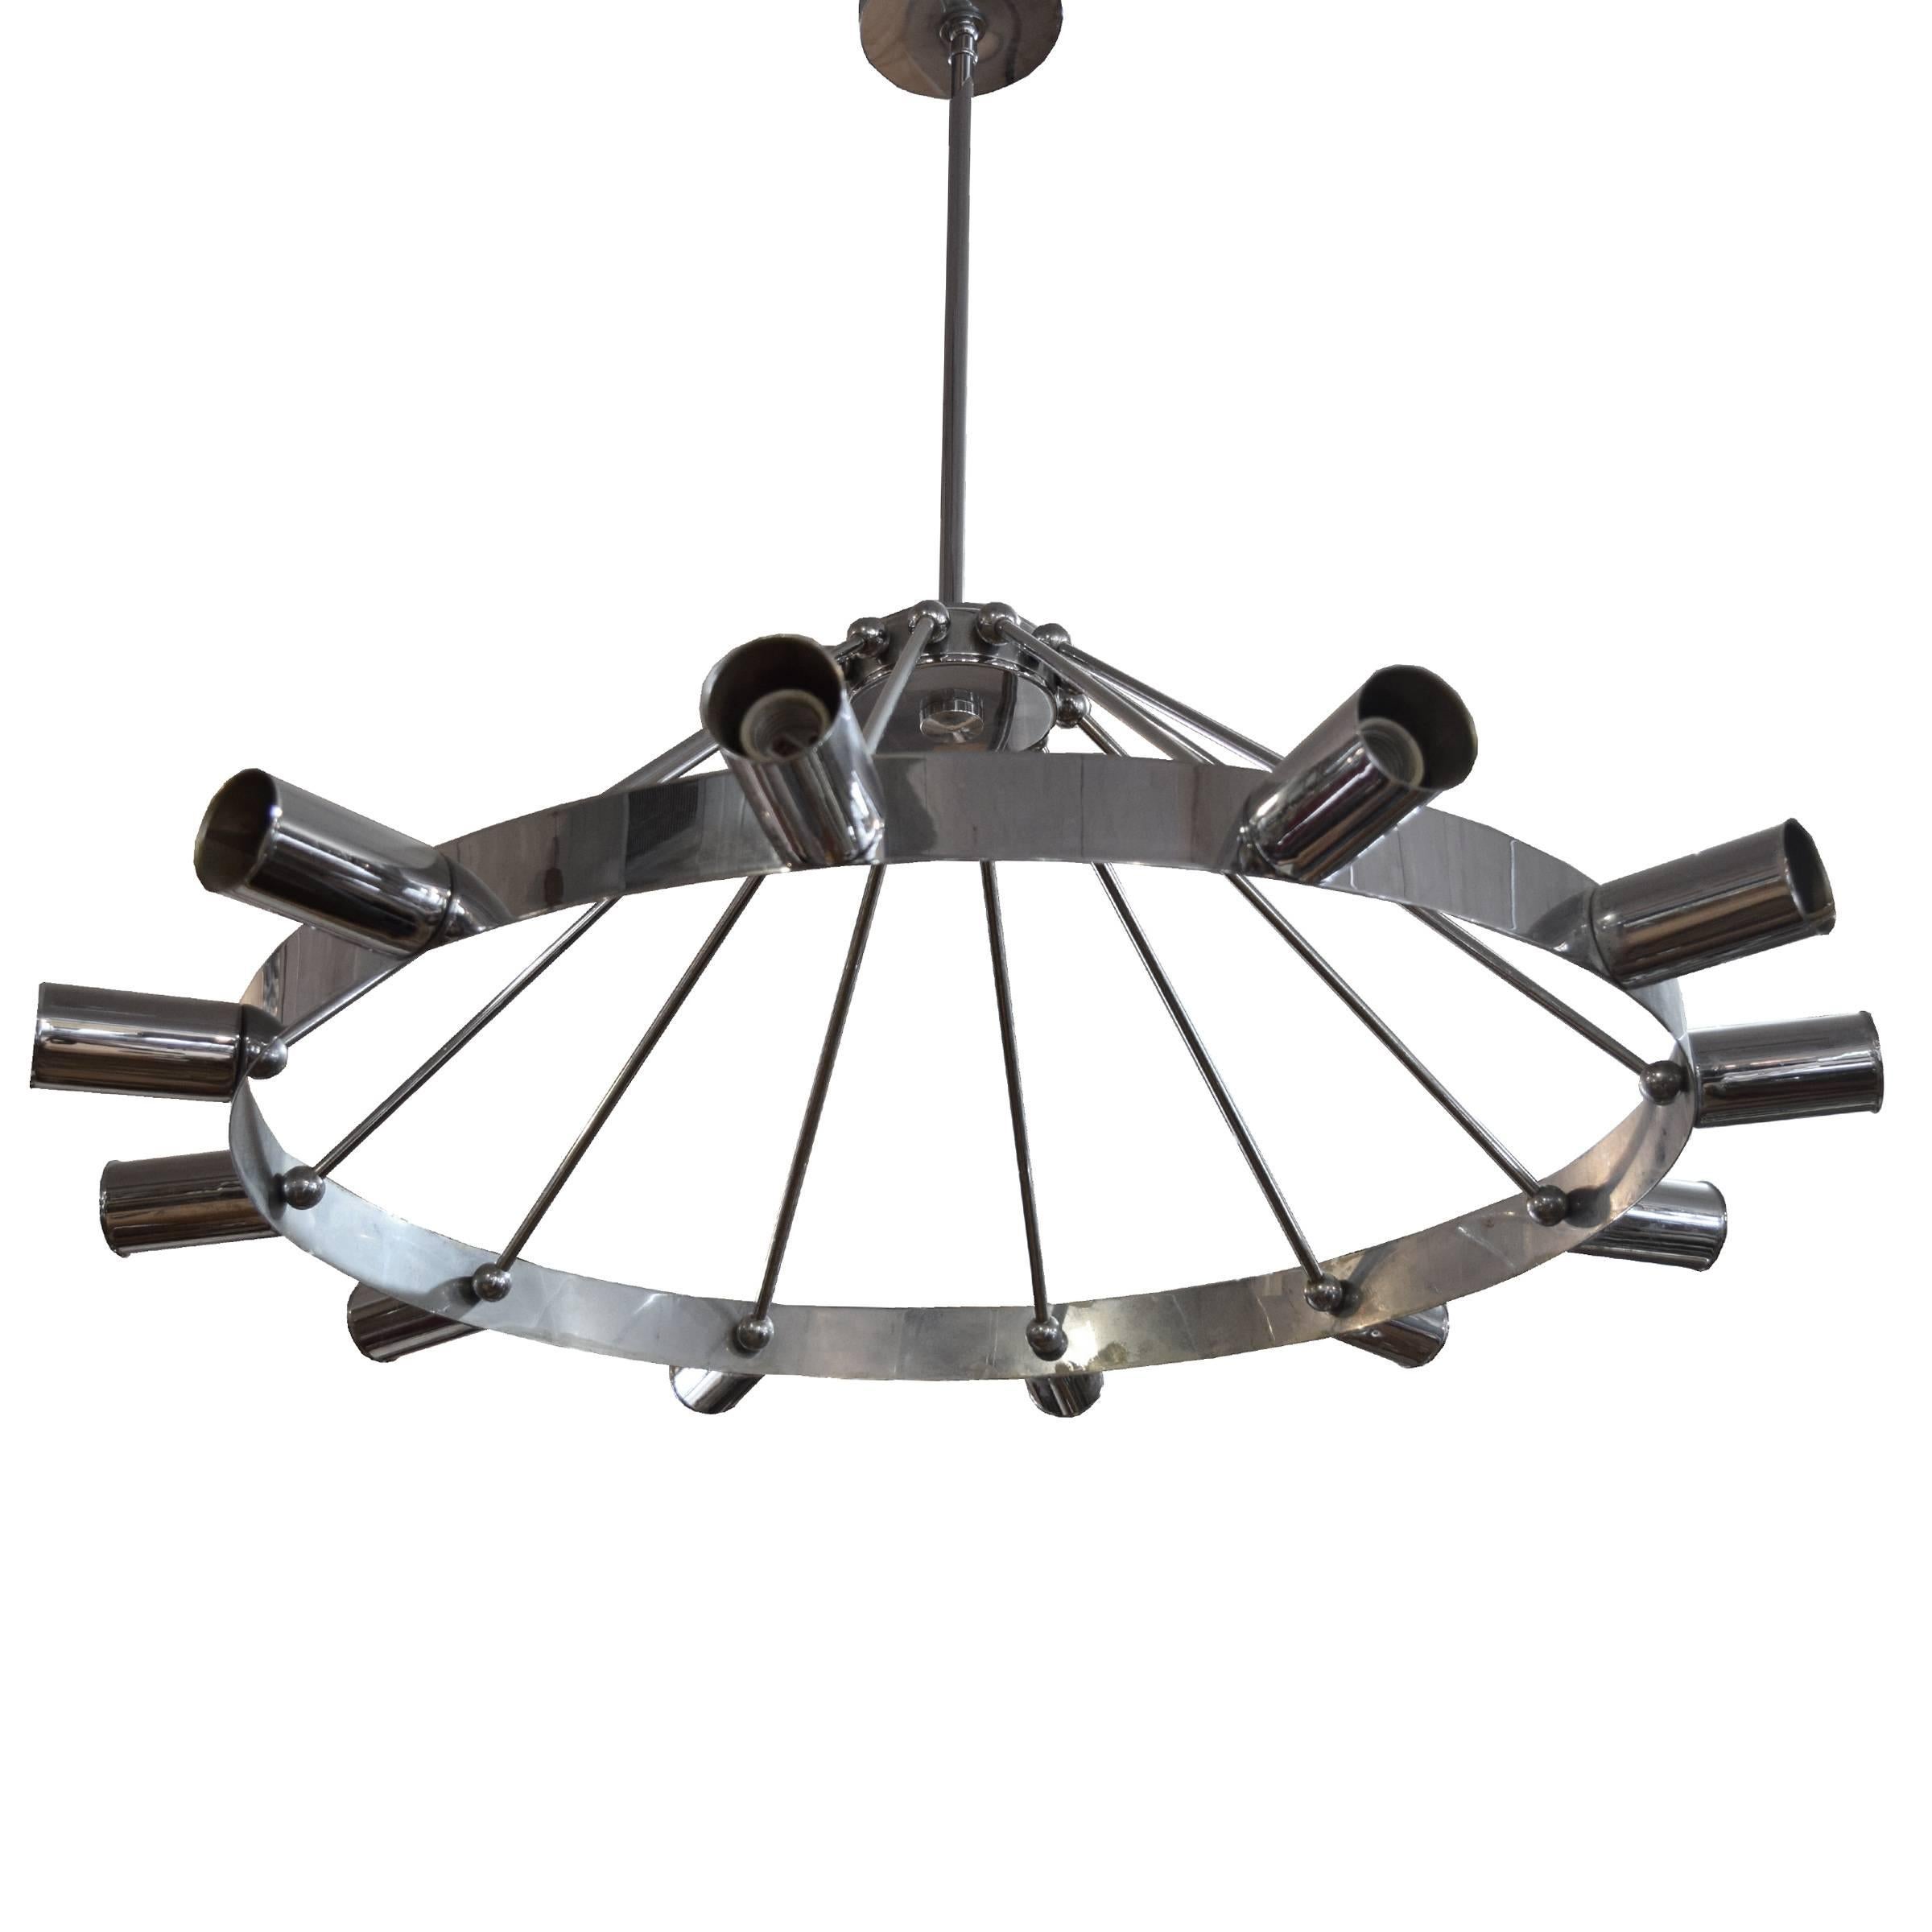 An American Mid-Century chrome chandelier with 12 lights around a ring connecting to a center hub.
Requires re-wiring.